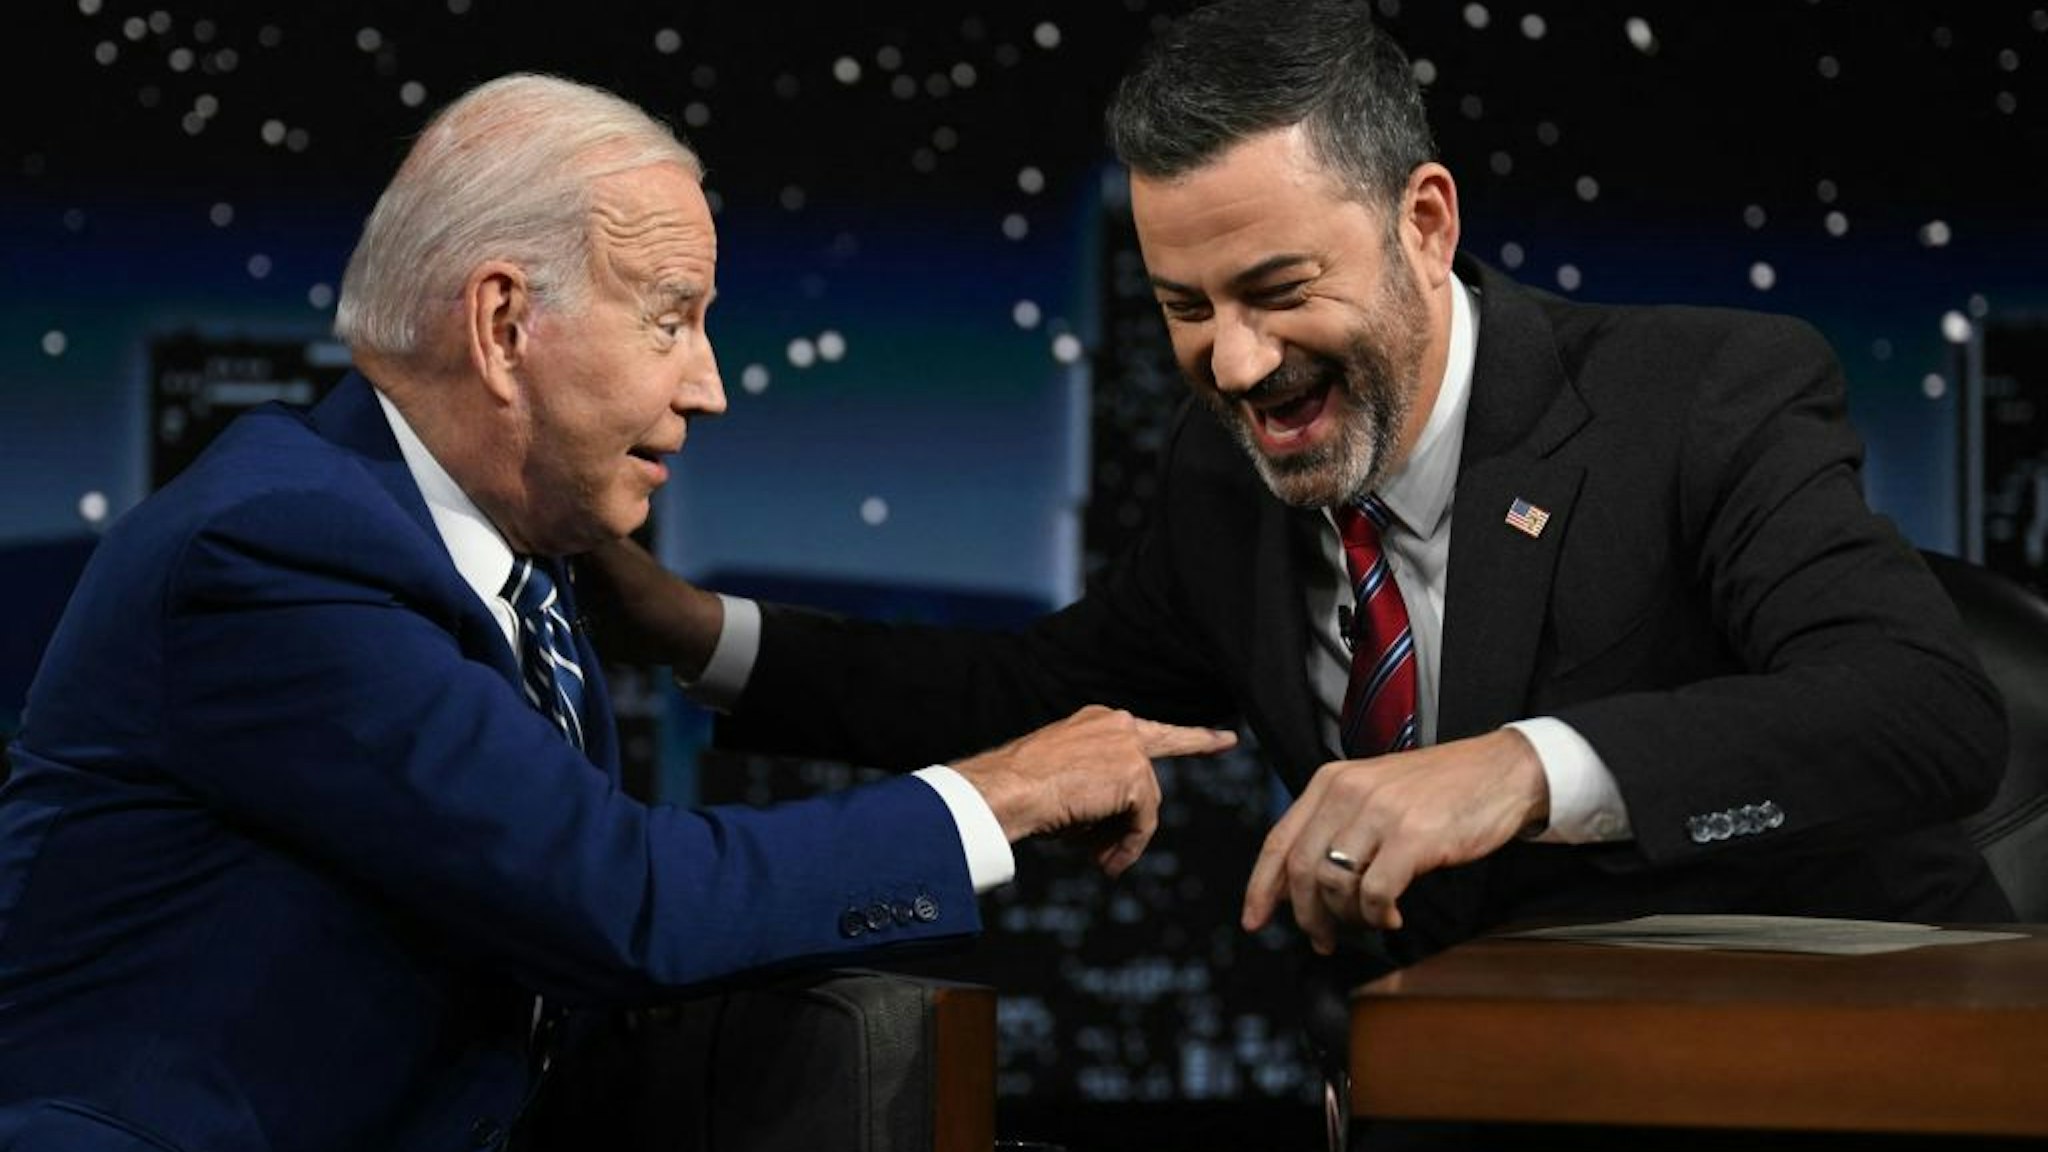 TOPSHOT - US President Joe Biden speaks with host Jimmy Kimmel as he makes his first in-person appearance on "Jimmy Kimmel Live!" during his Los Angeles visit to attend the Summit of the Americas, in Hollywood, California, June 8, 2022. (Photo by Jim WATSON / AFP) (Photo by JIM WATSON/AFP via Getty Images)